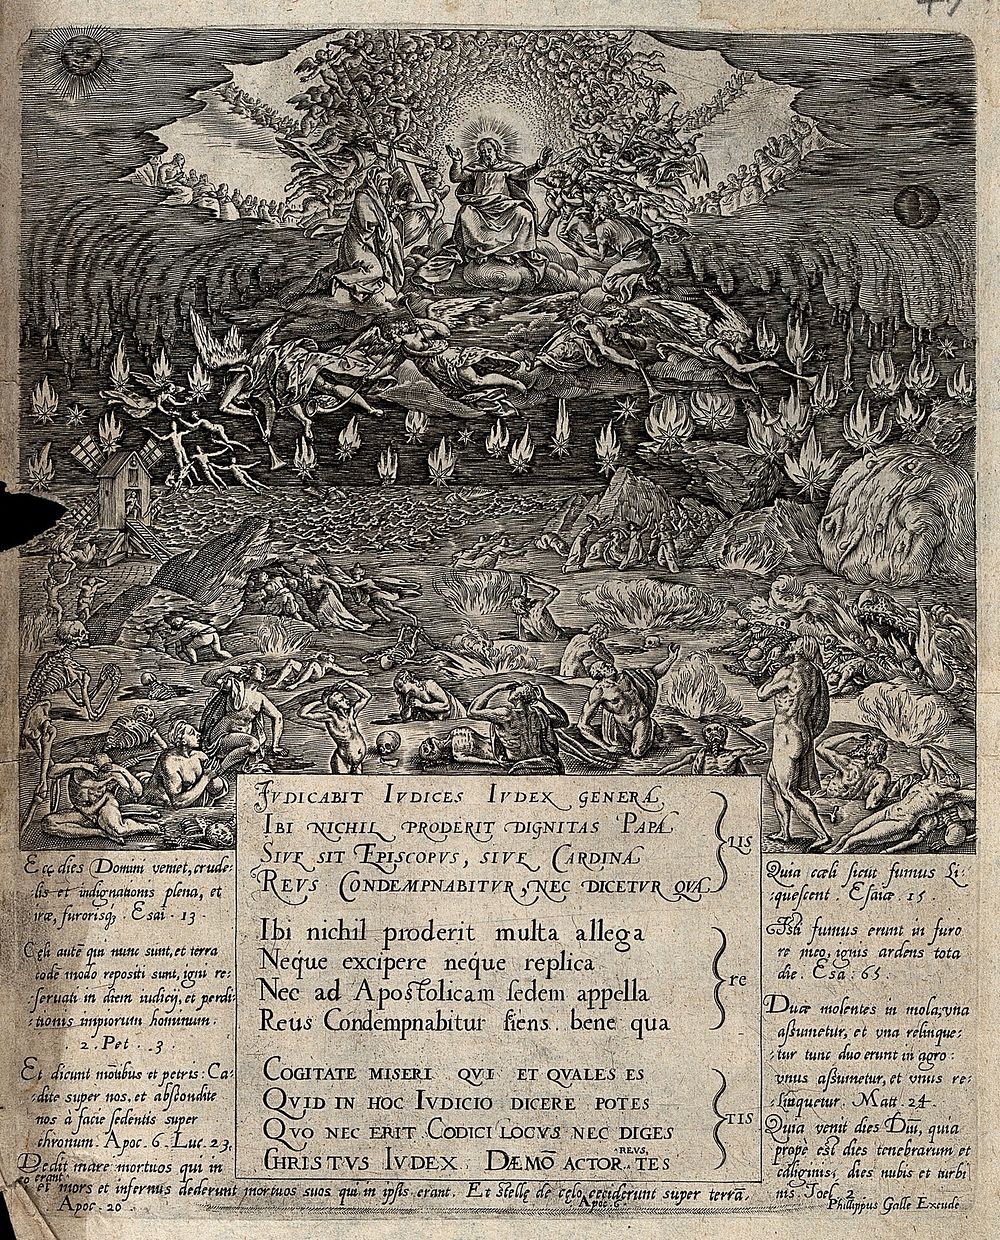 The heavens open on the day of judgement; Christ appears above the coast of the Netherlands. Engraving, 16th century.